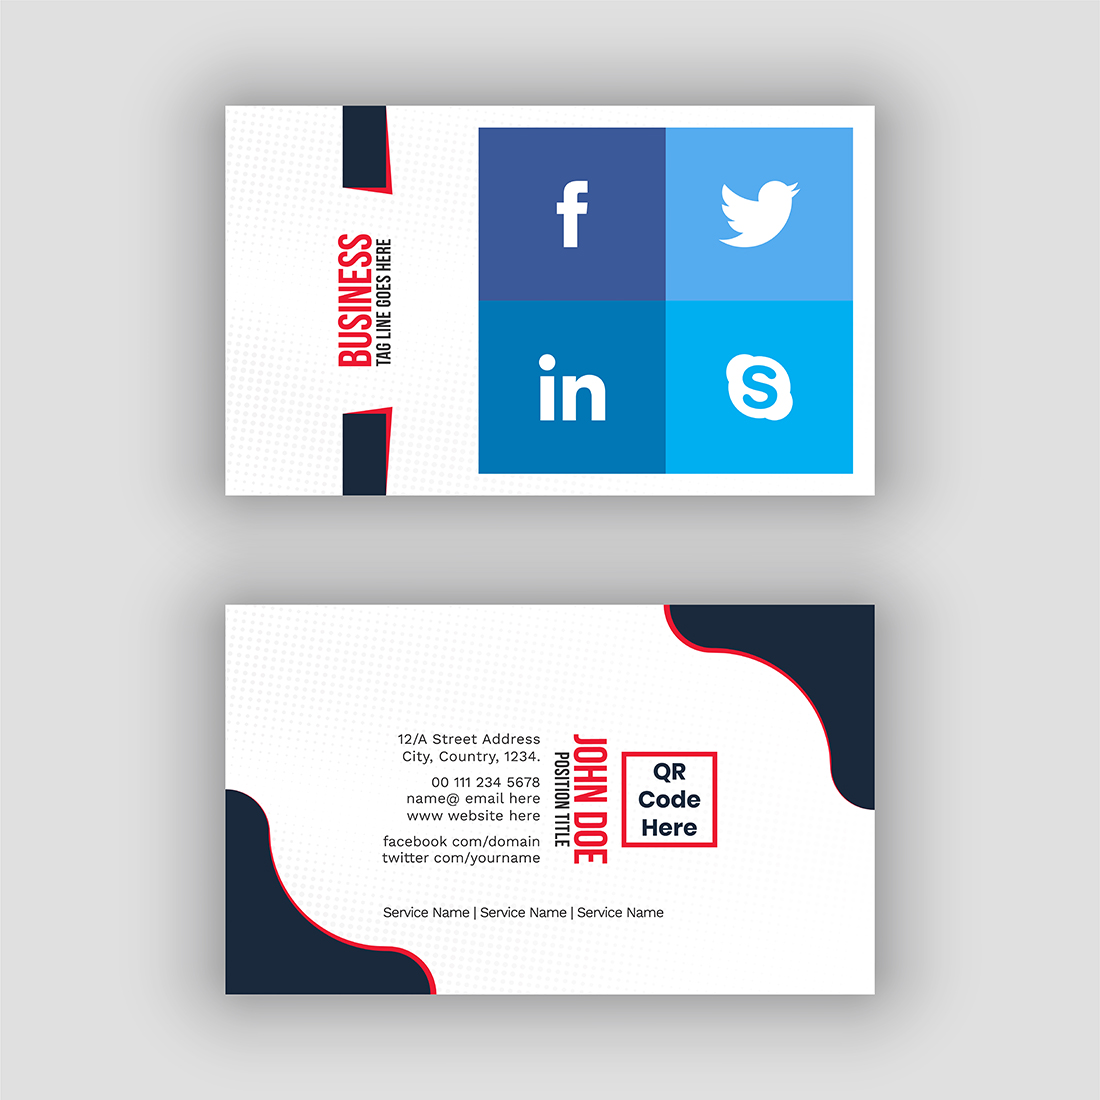 Digital Marketing Service Business Card Design Template preview image.